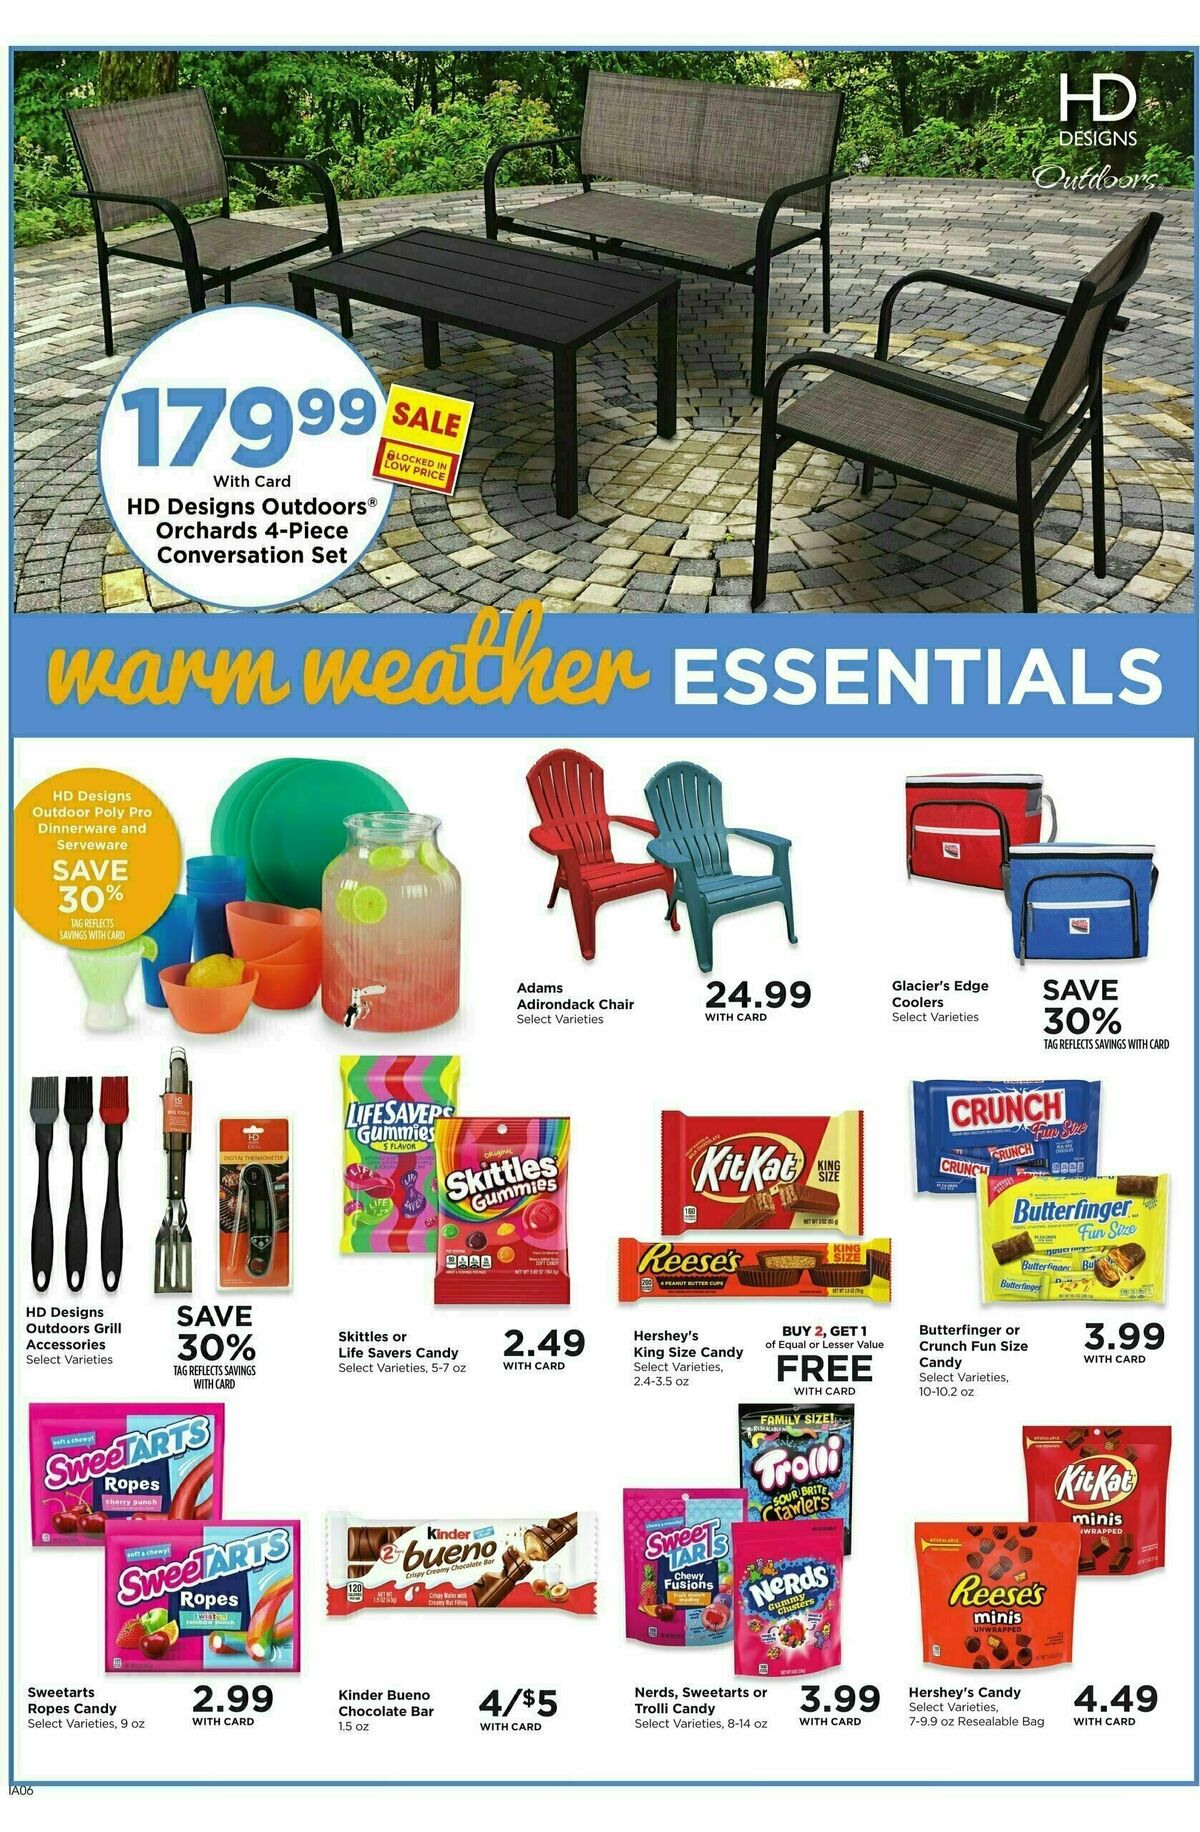 QFC Weekly Ad from May 8